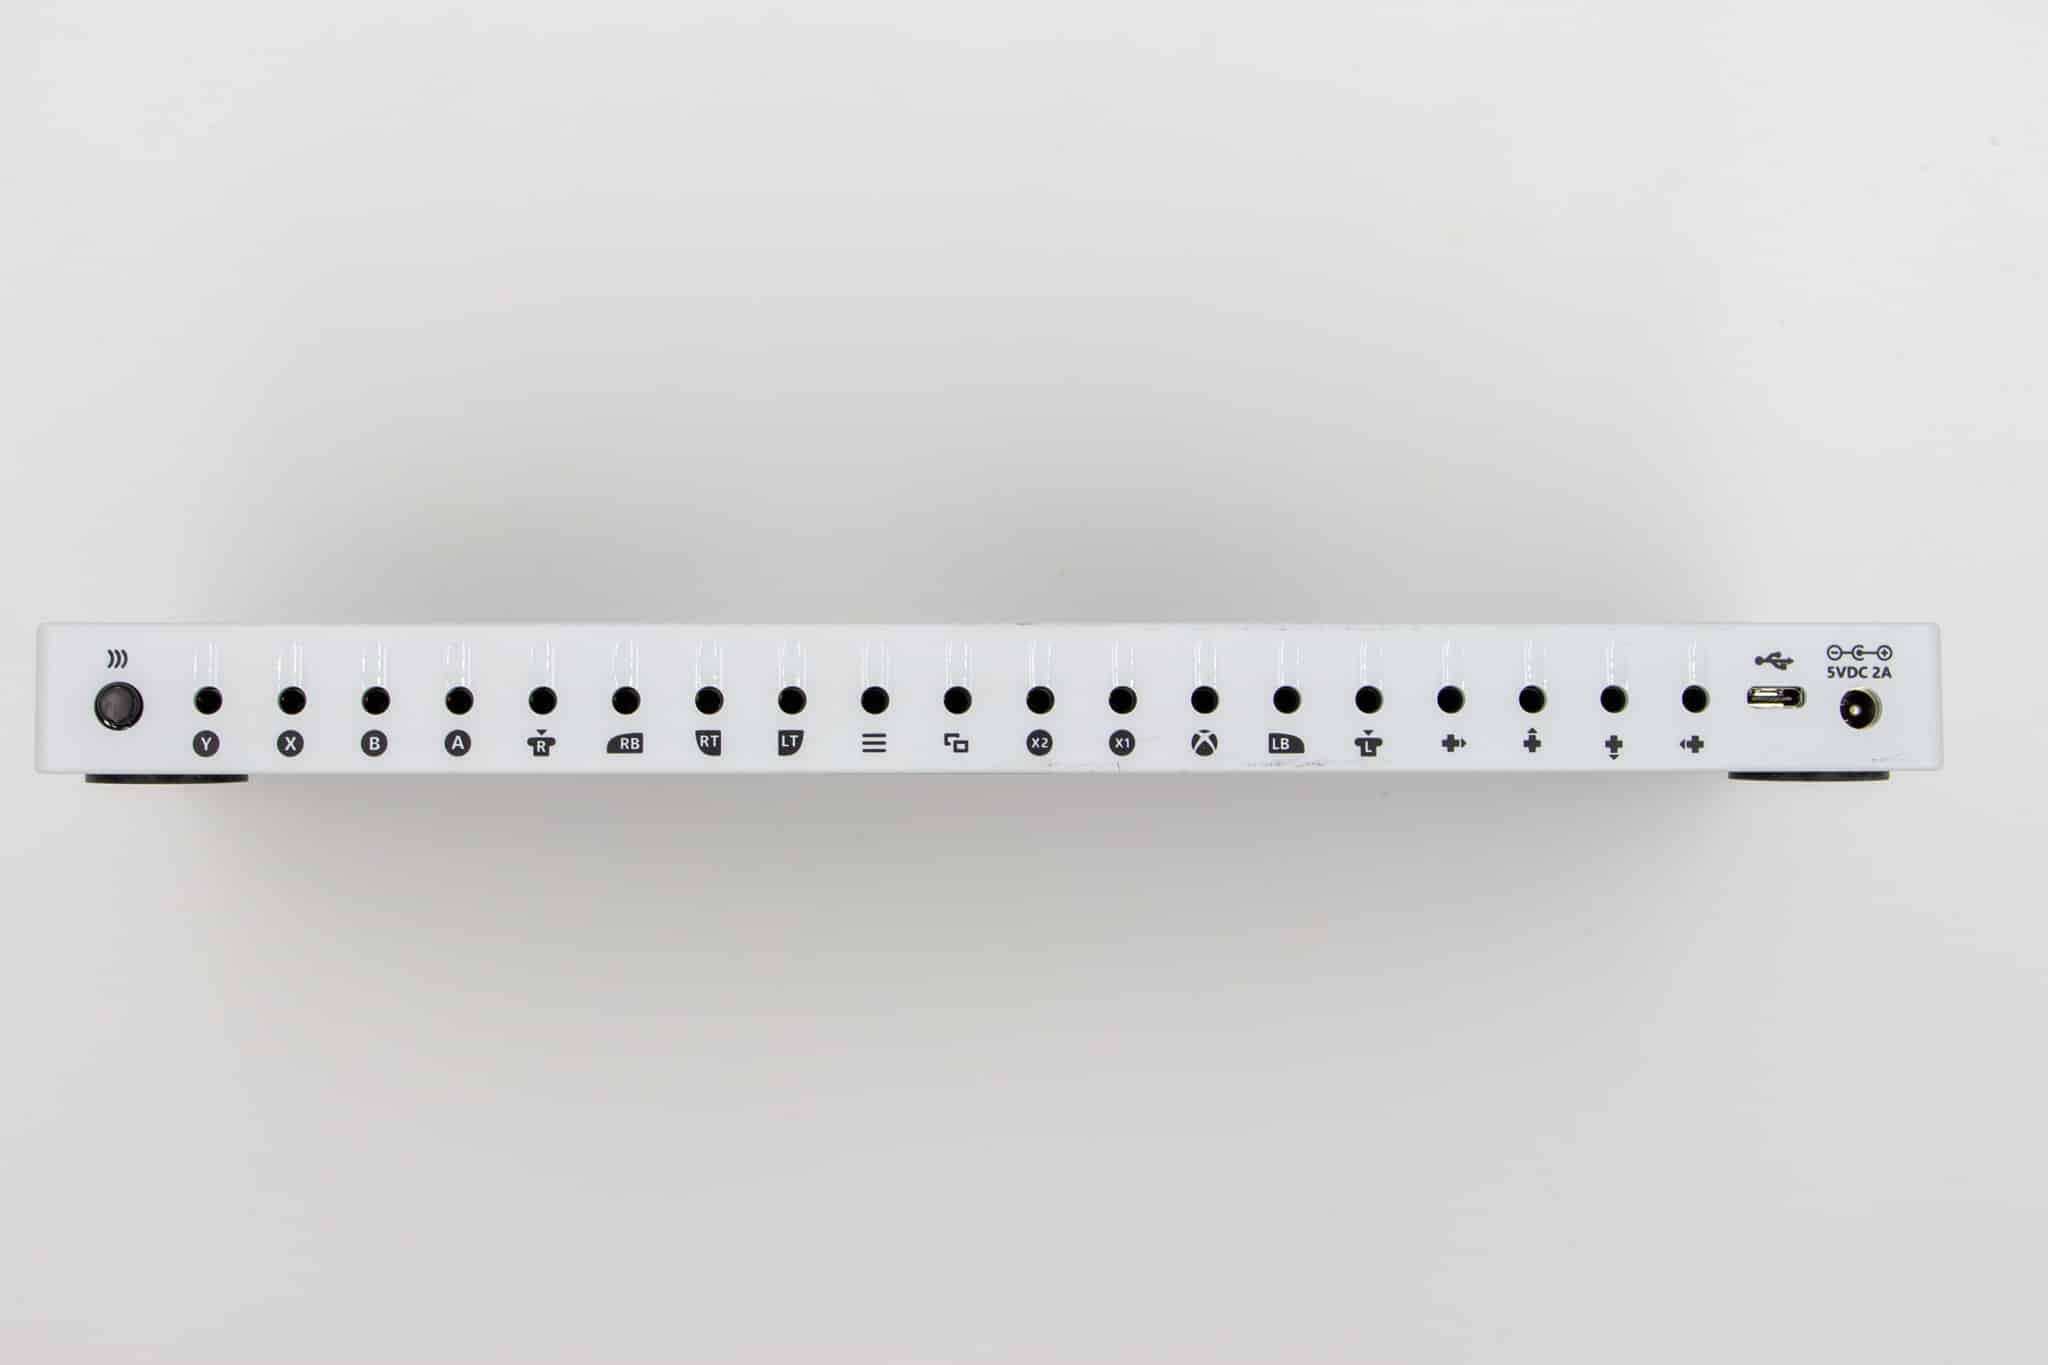 The various ports on the back of an Xbox Adaptive Controller. There are icons below each port indicating what input it represents.